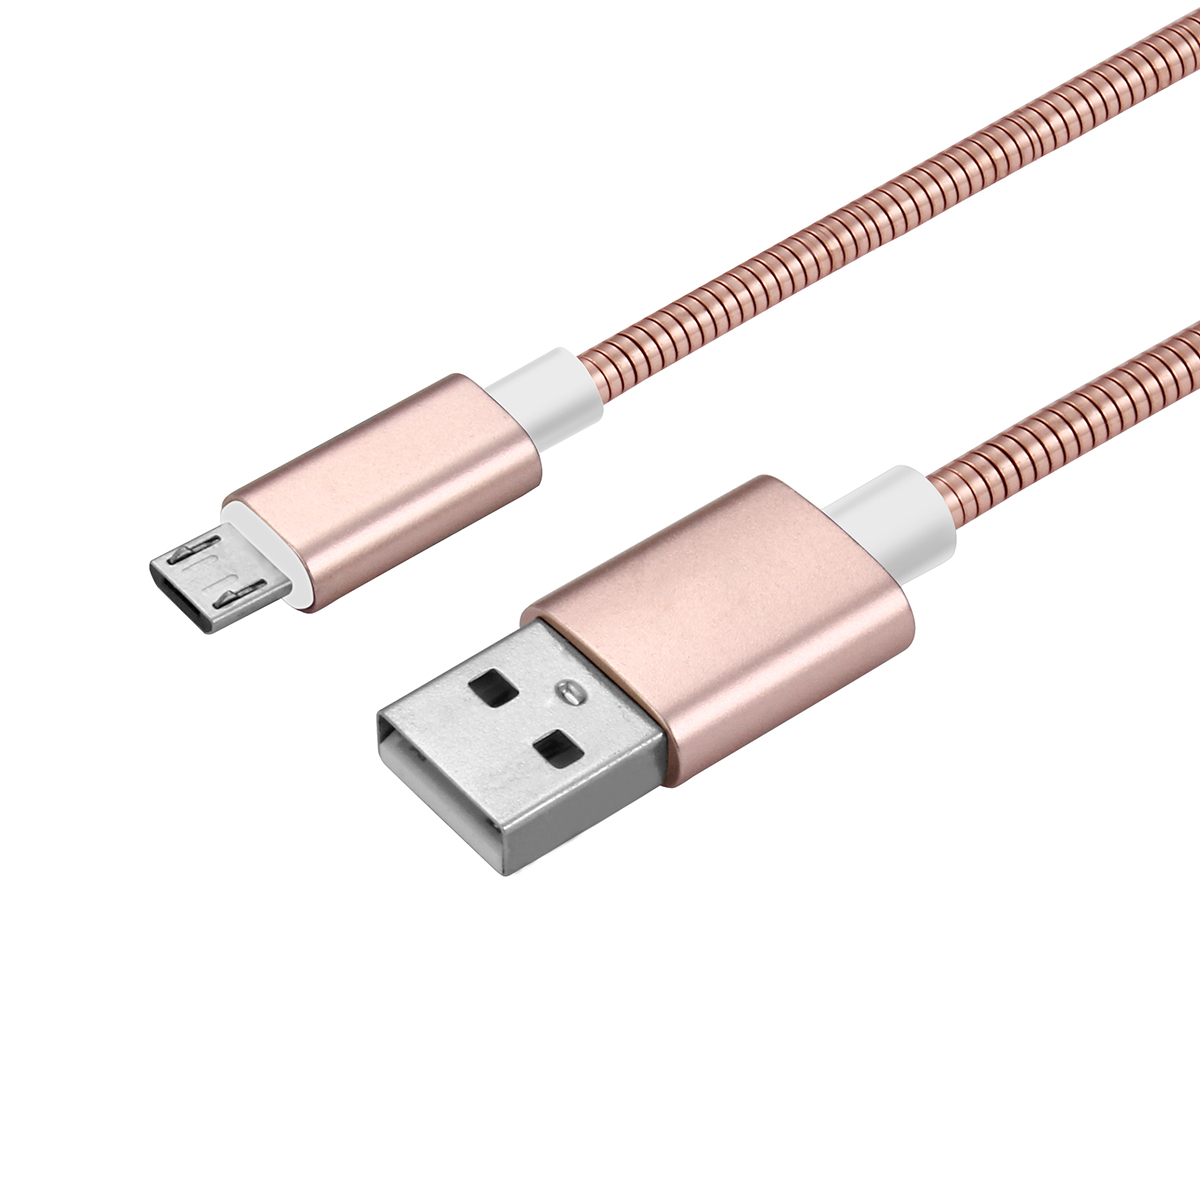 Metal Stainless Steel Spring Woven Micro USB Charging Data Cable for Android Devices - Rose Gold